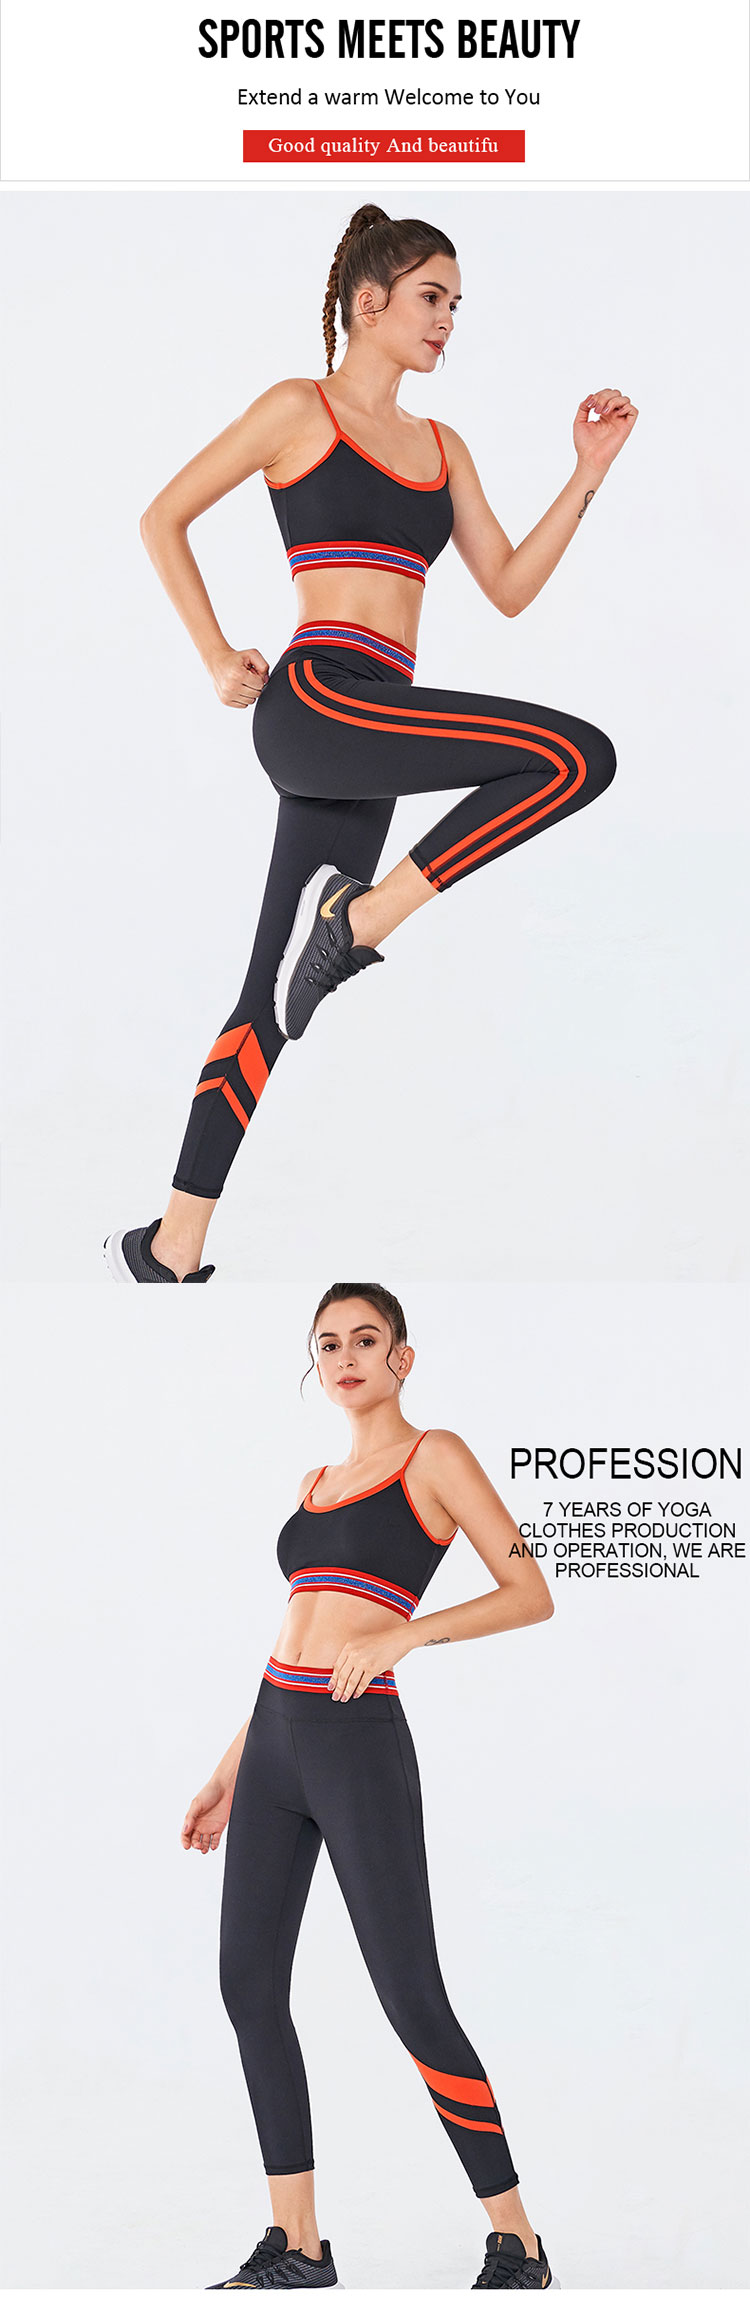 Striped running leggings is the theme of sport, so the energetic sunny yellow sports